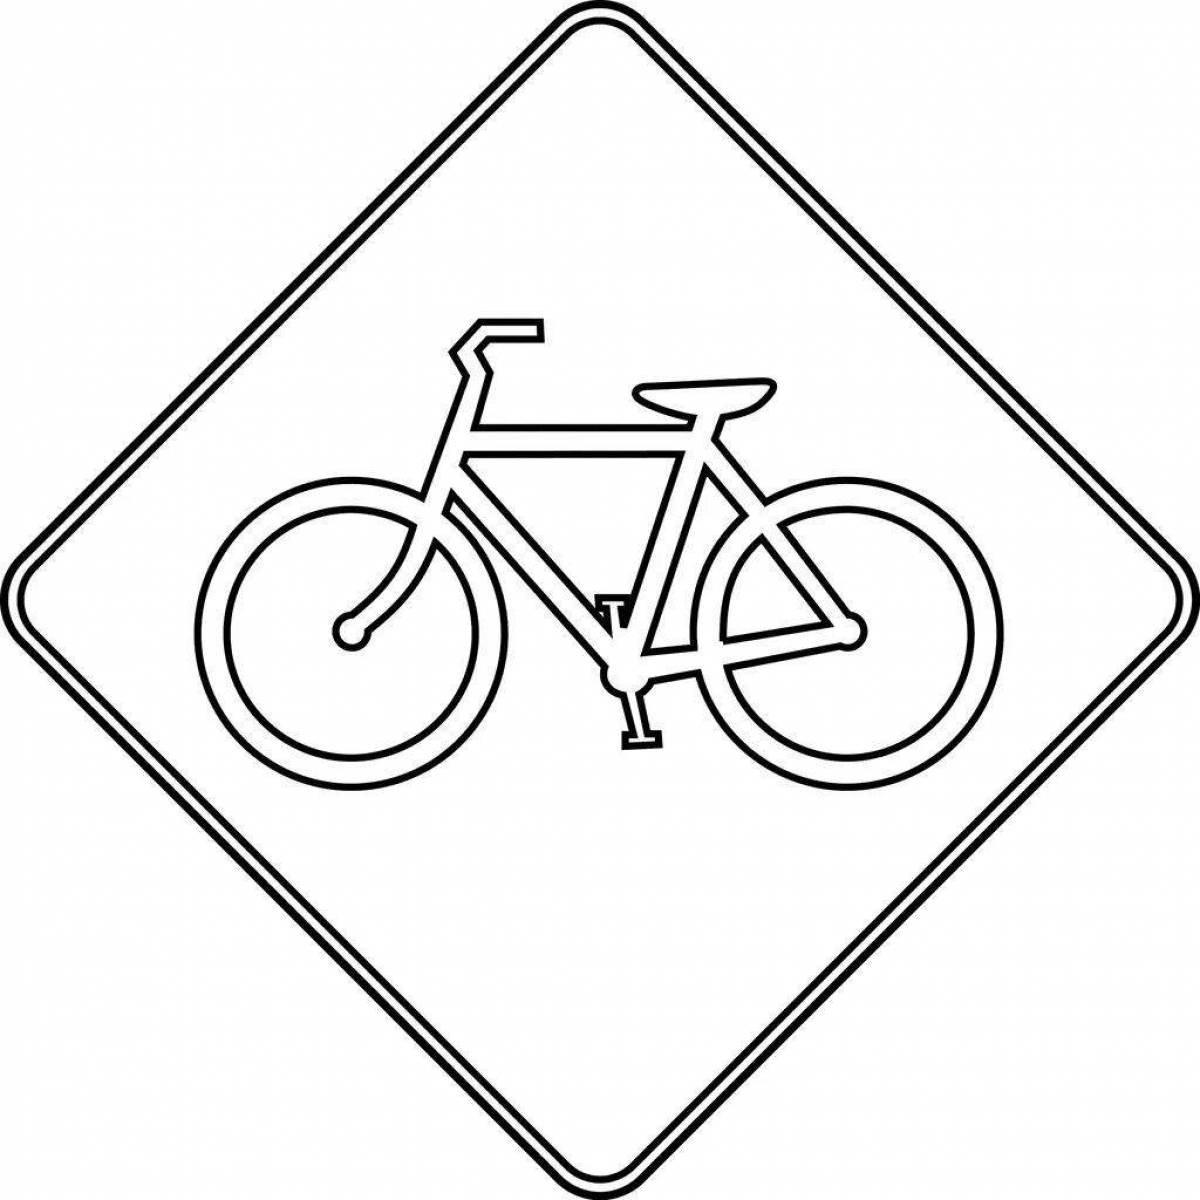 Exciting bike path coloring page